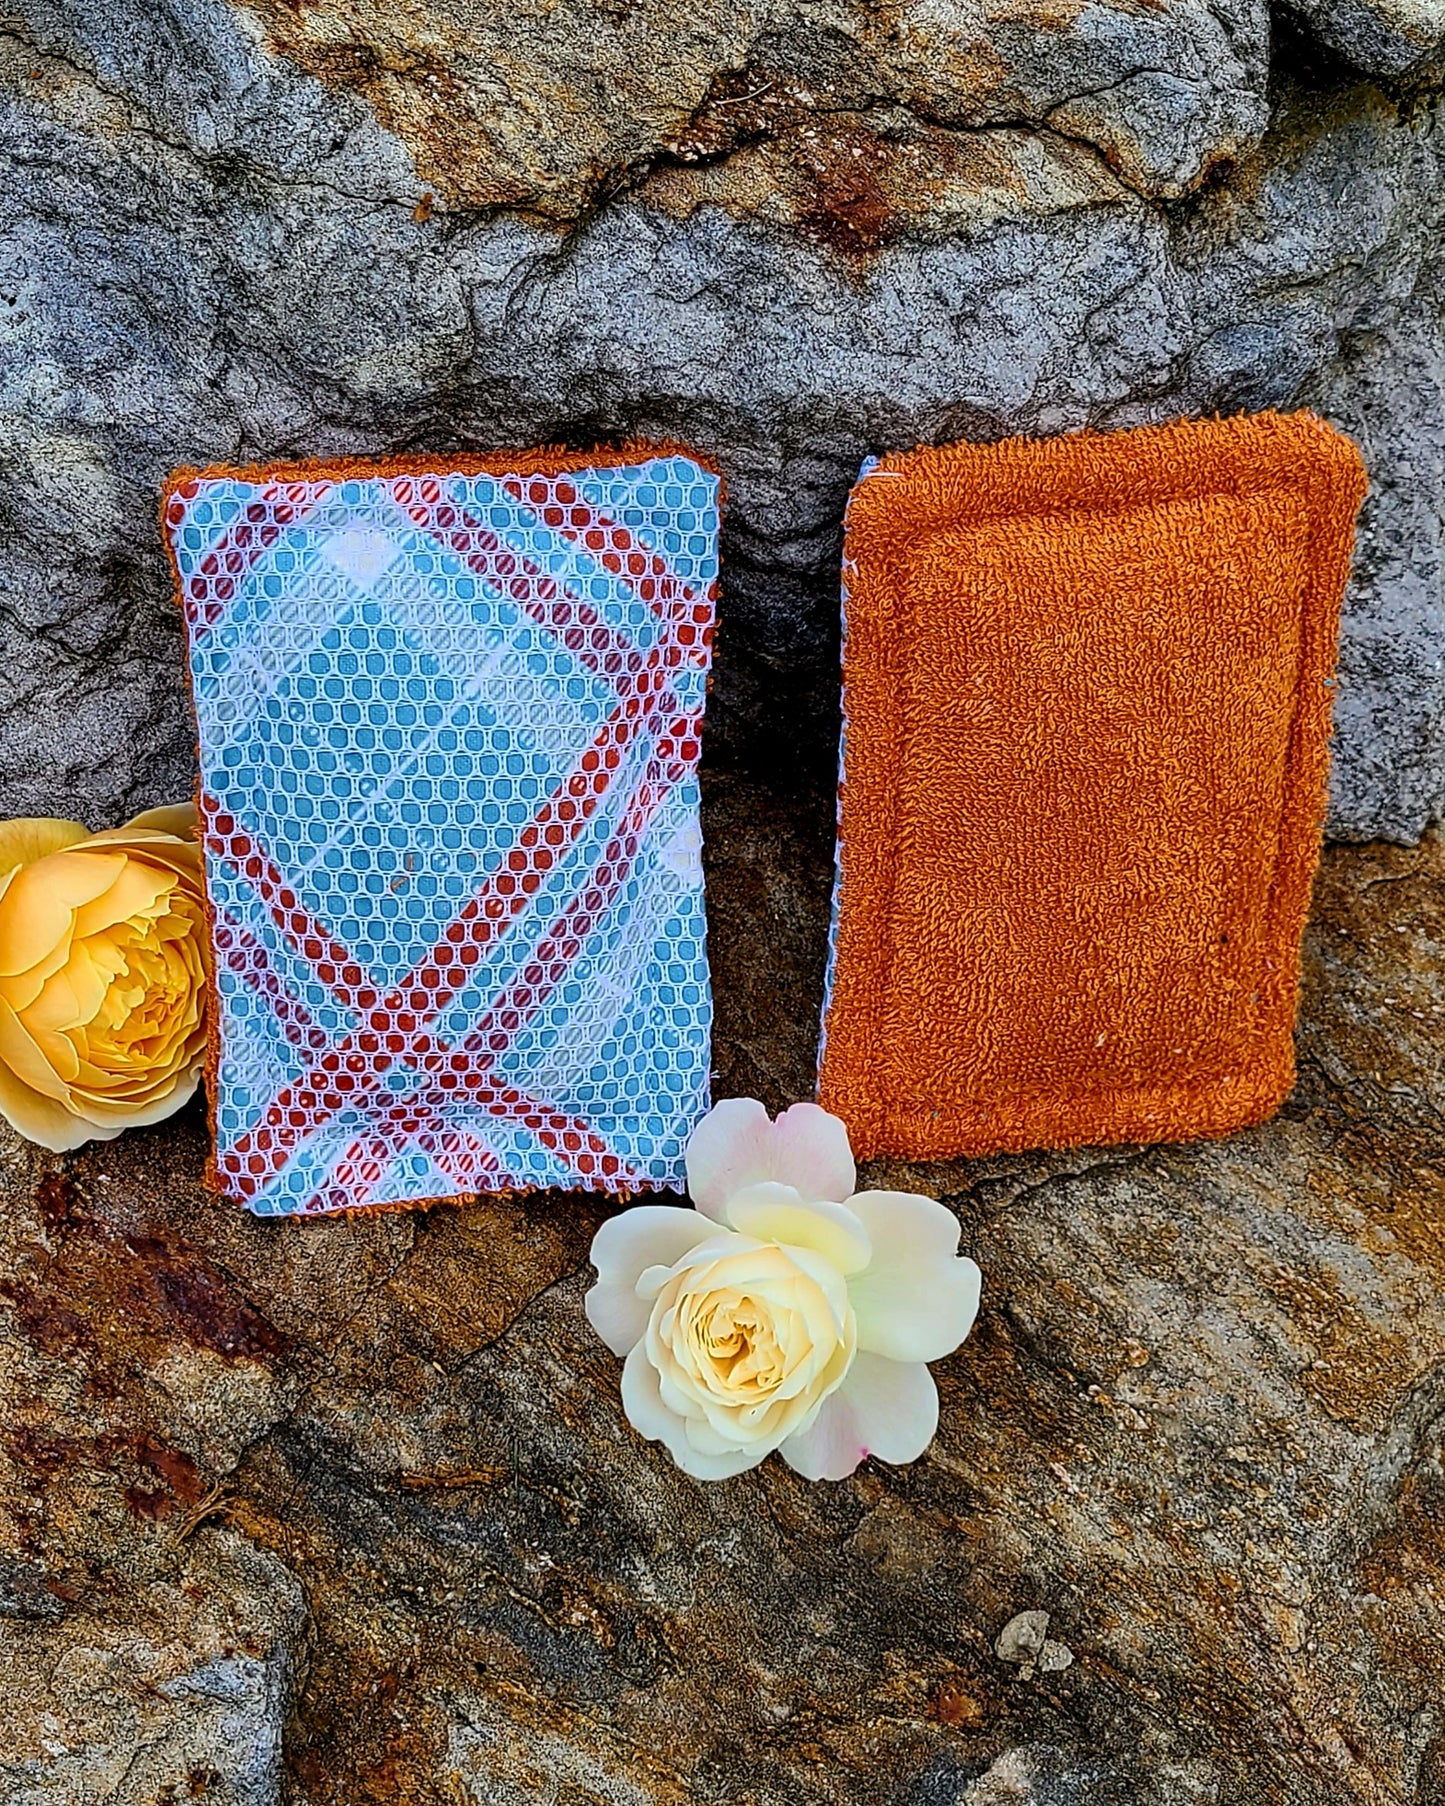 Sponges - Reusable and Washable